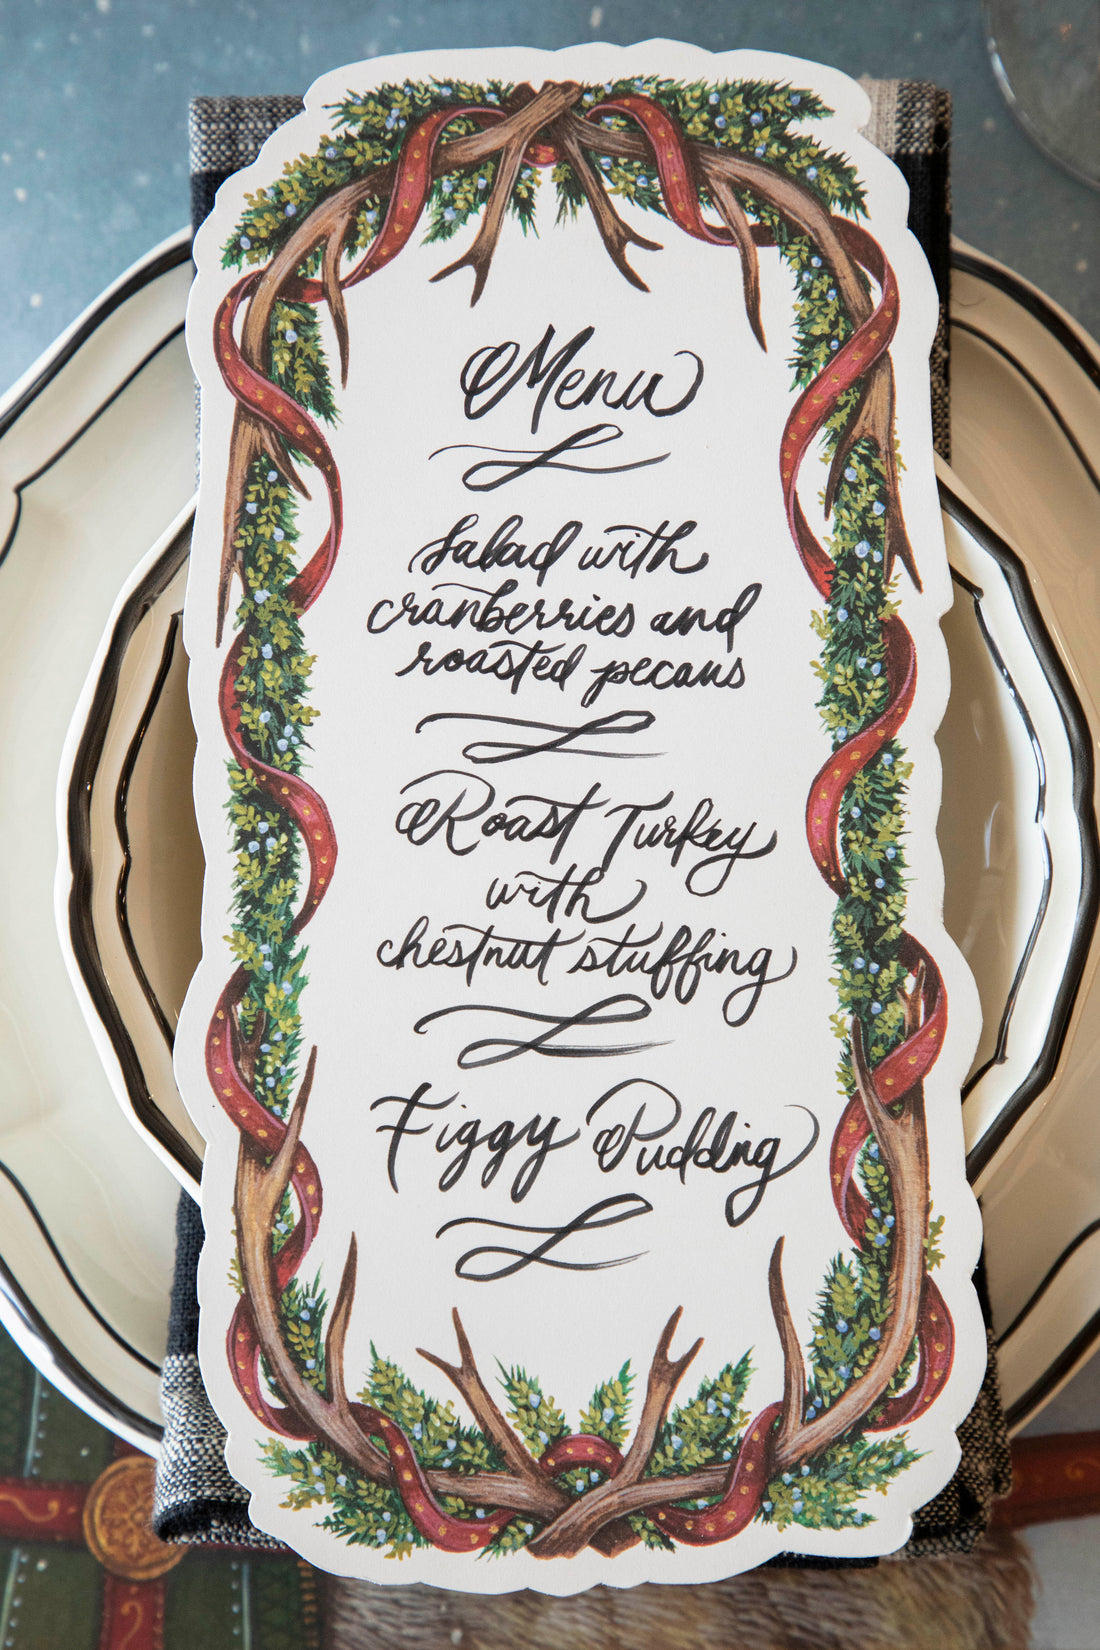 An Antler Garland Table Card with a menu written on it in lovely cursive, resting on the plate of a Christmas place setting.